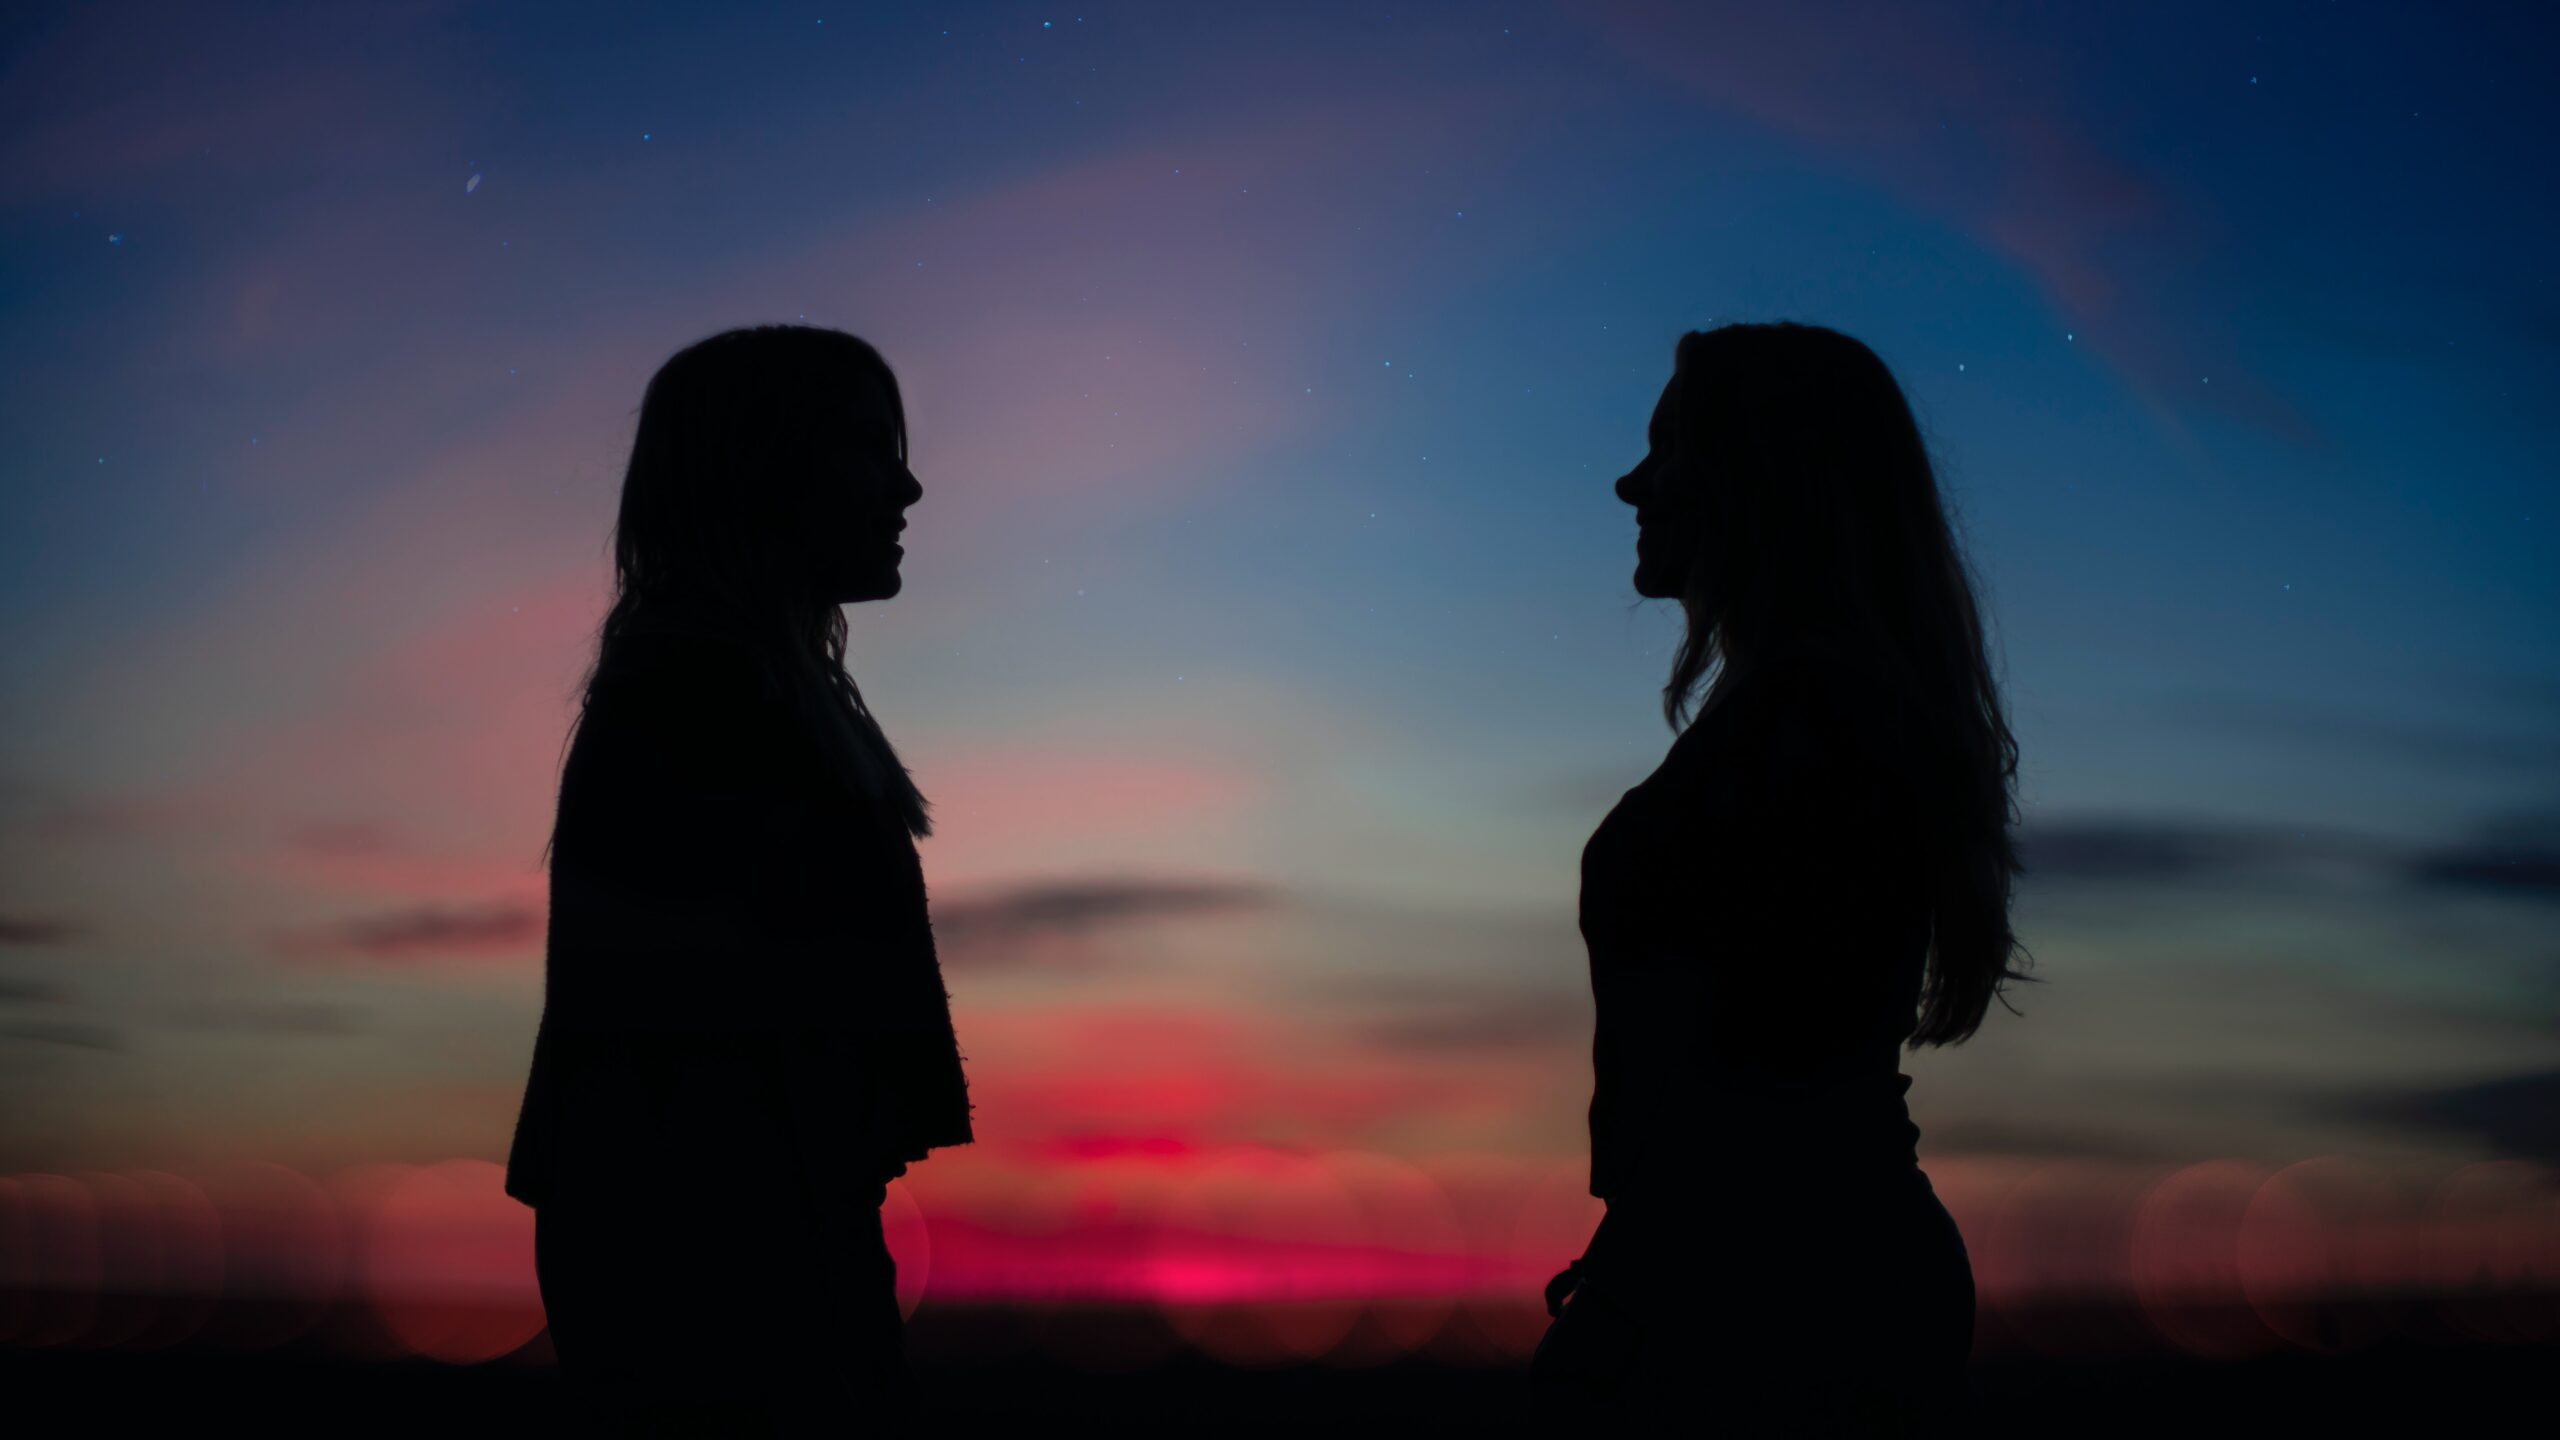 two women facing each other in profile, silhouetted against a sunset